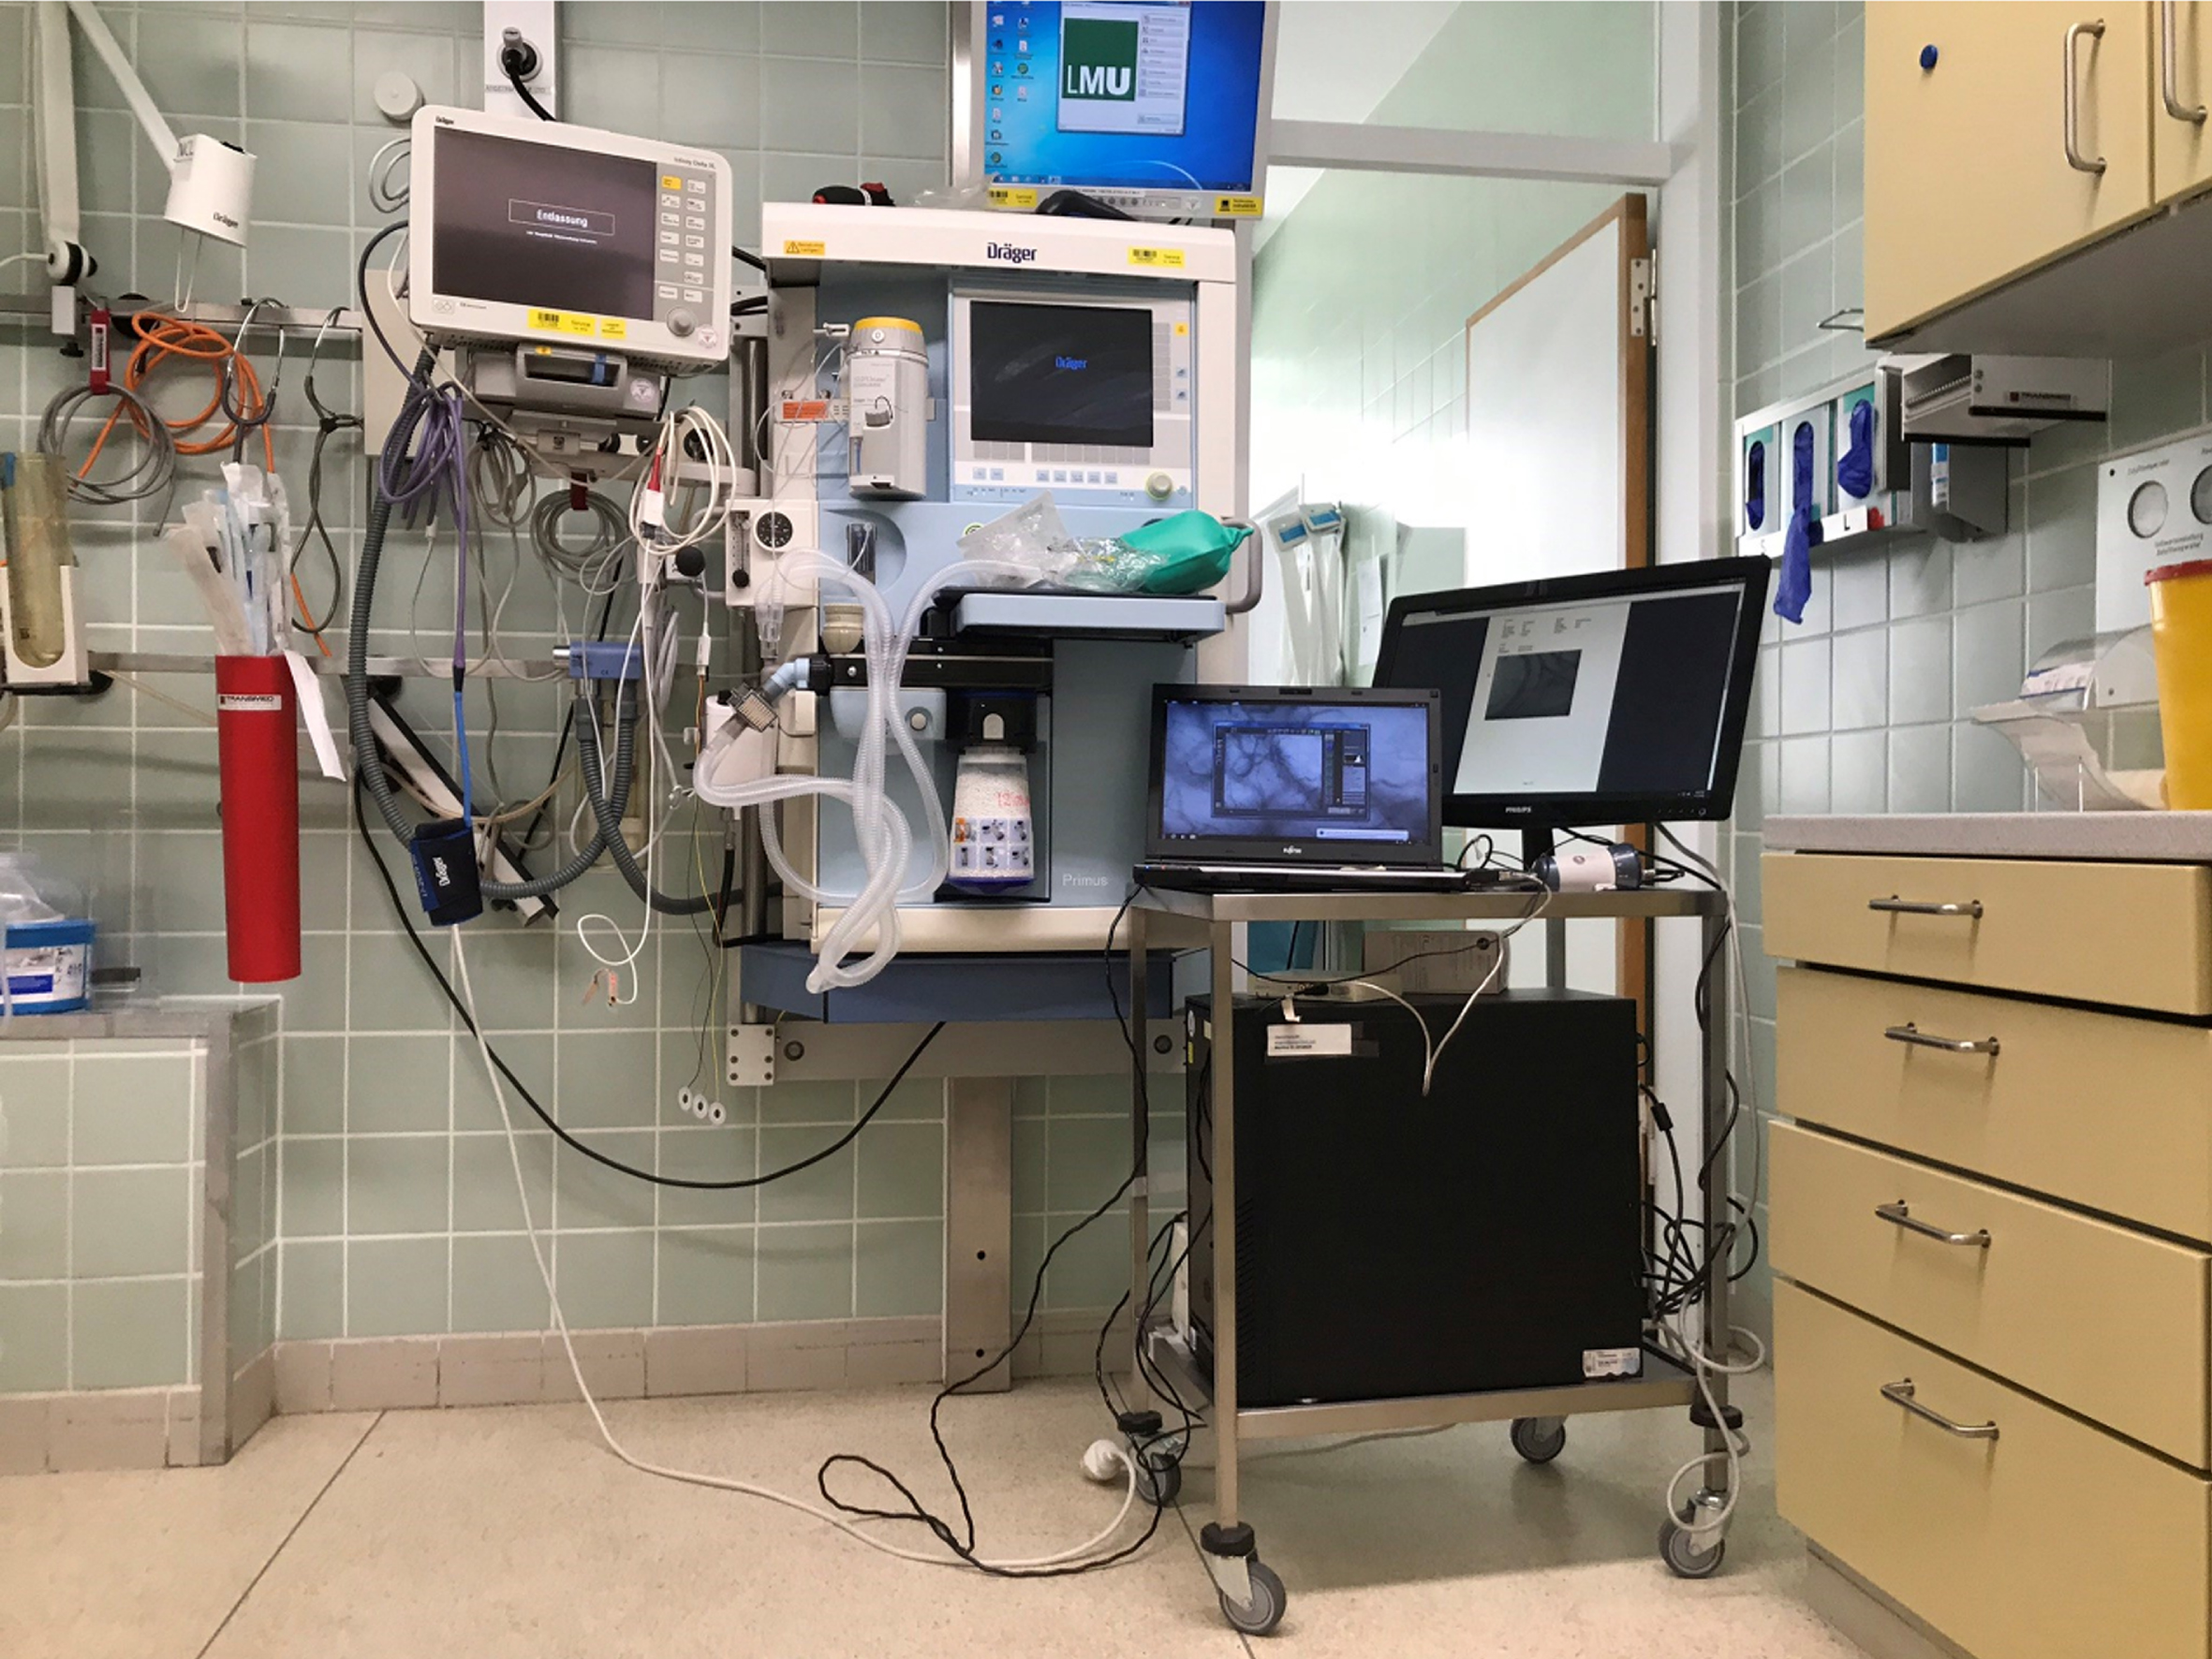 Picture of the anesthesia induction room with the “microcirculation-imaging unit” including SDF-camera, computer, and monitor. To allow flexible recordings and changes between different locations (induction room, operating room, PICU), the equipment was placed on a mobile instrument card and provided with an uninterruptible power supply.